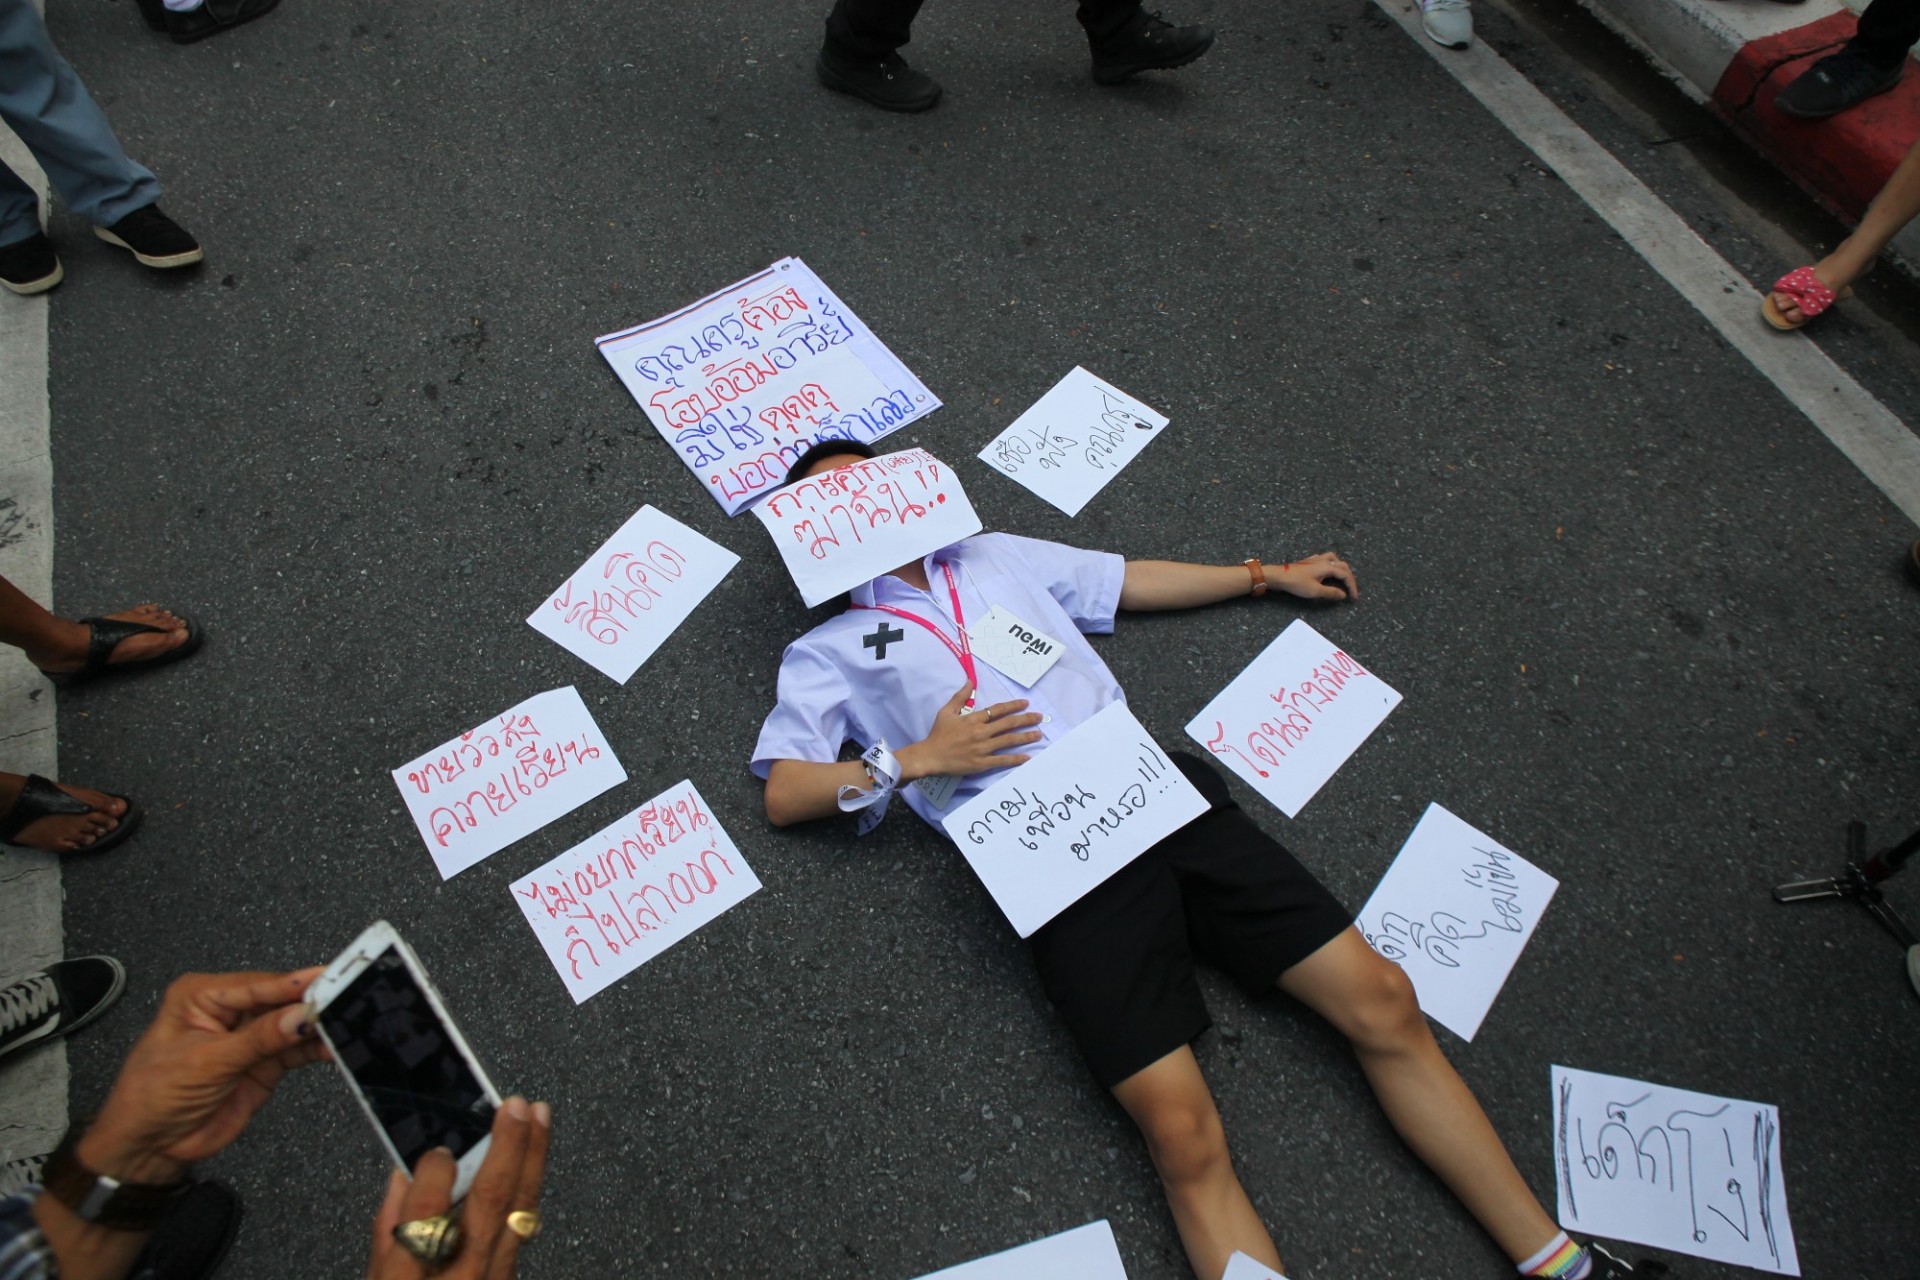 High school student protest in front of Ministry of Education, Bangkok, September 5, 2020Credit - Kan Sangtong, photojournalist and protest observer for Mob data Thailand 